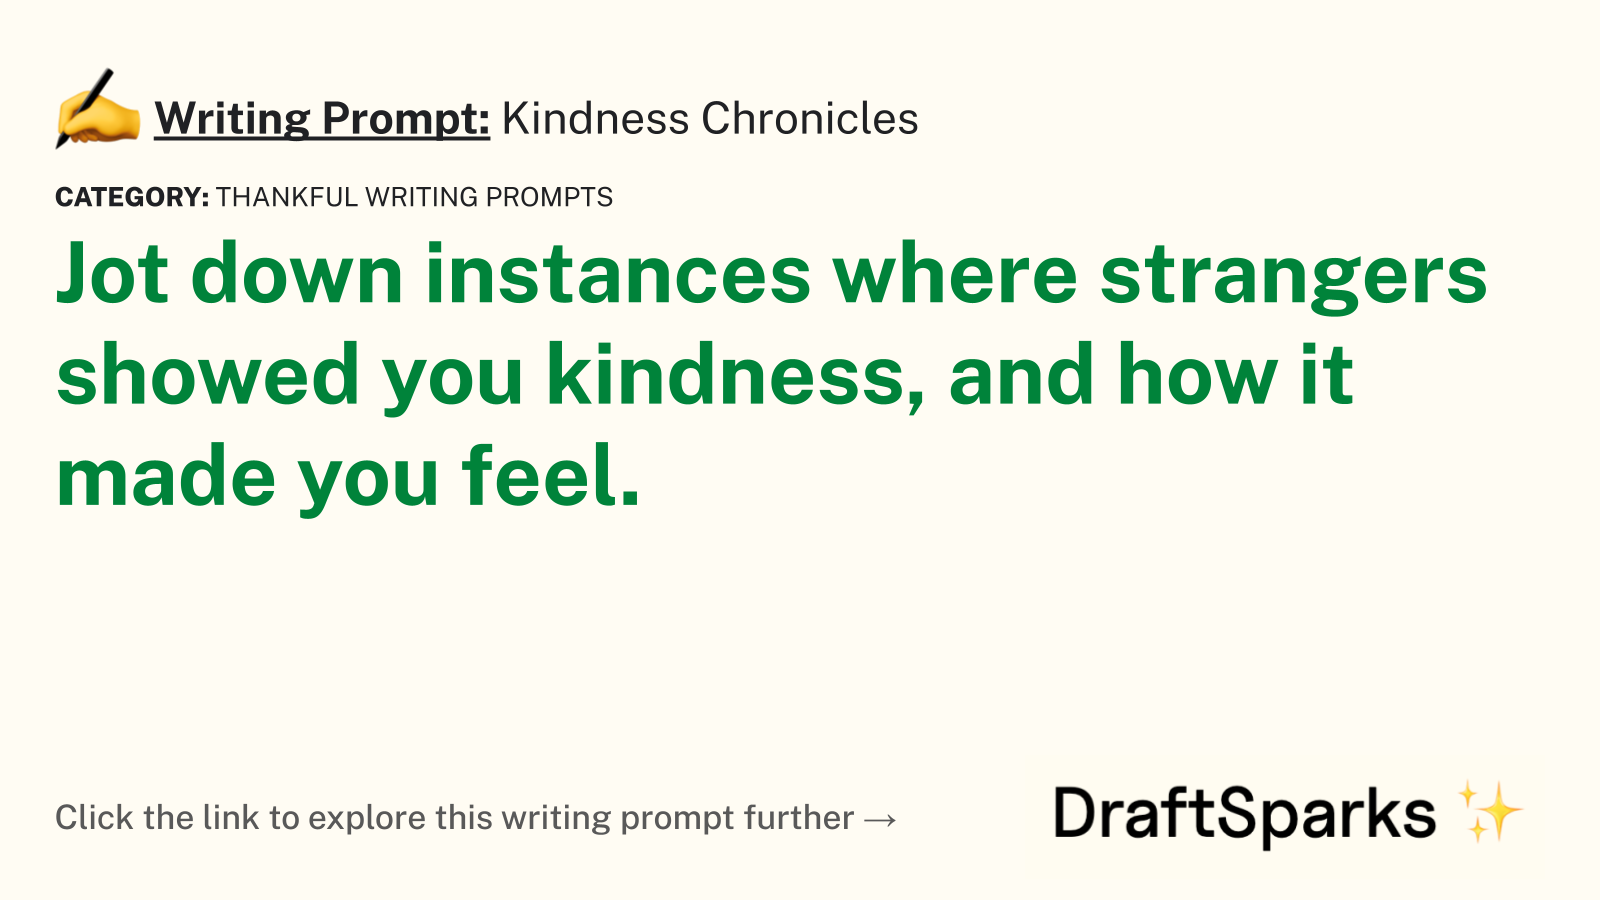 Kindness Chronicles